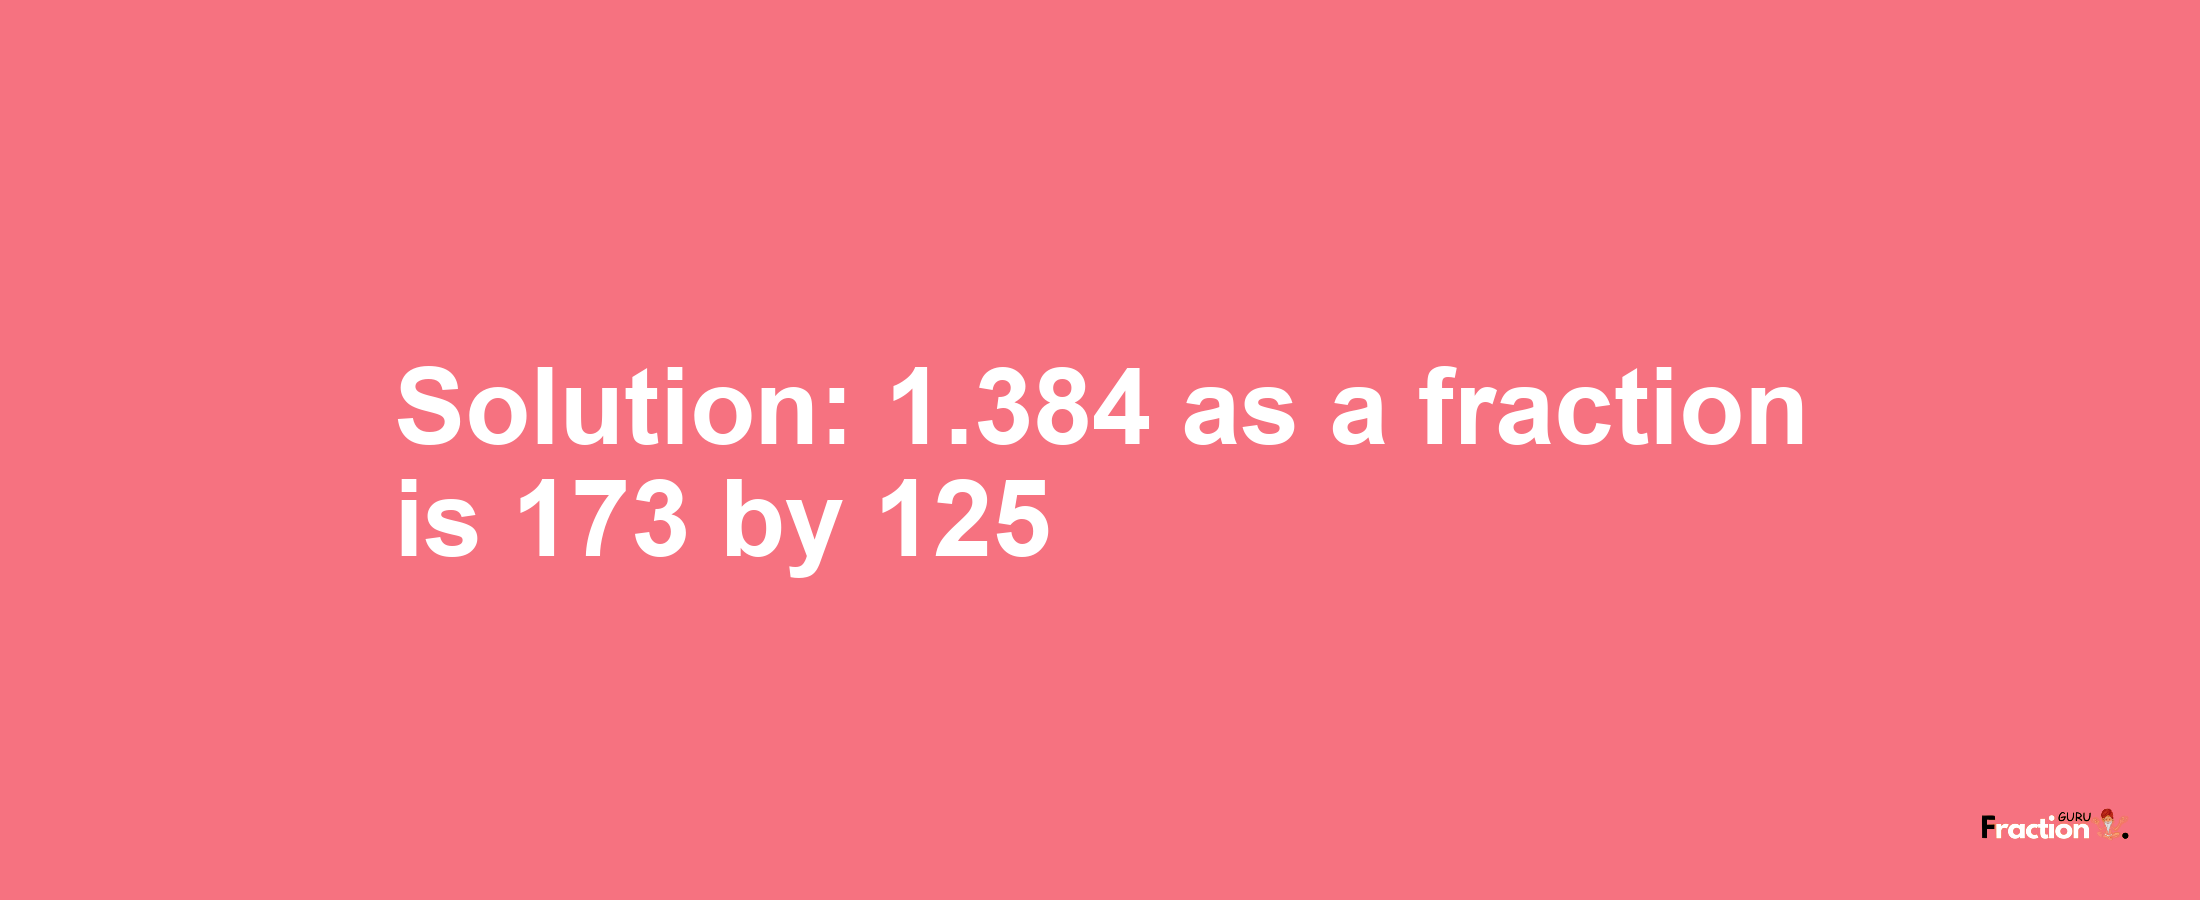 Solution:1.384 as a fraction is 173/125